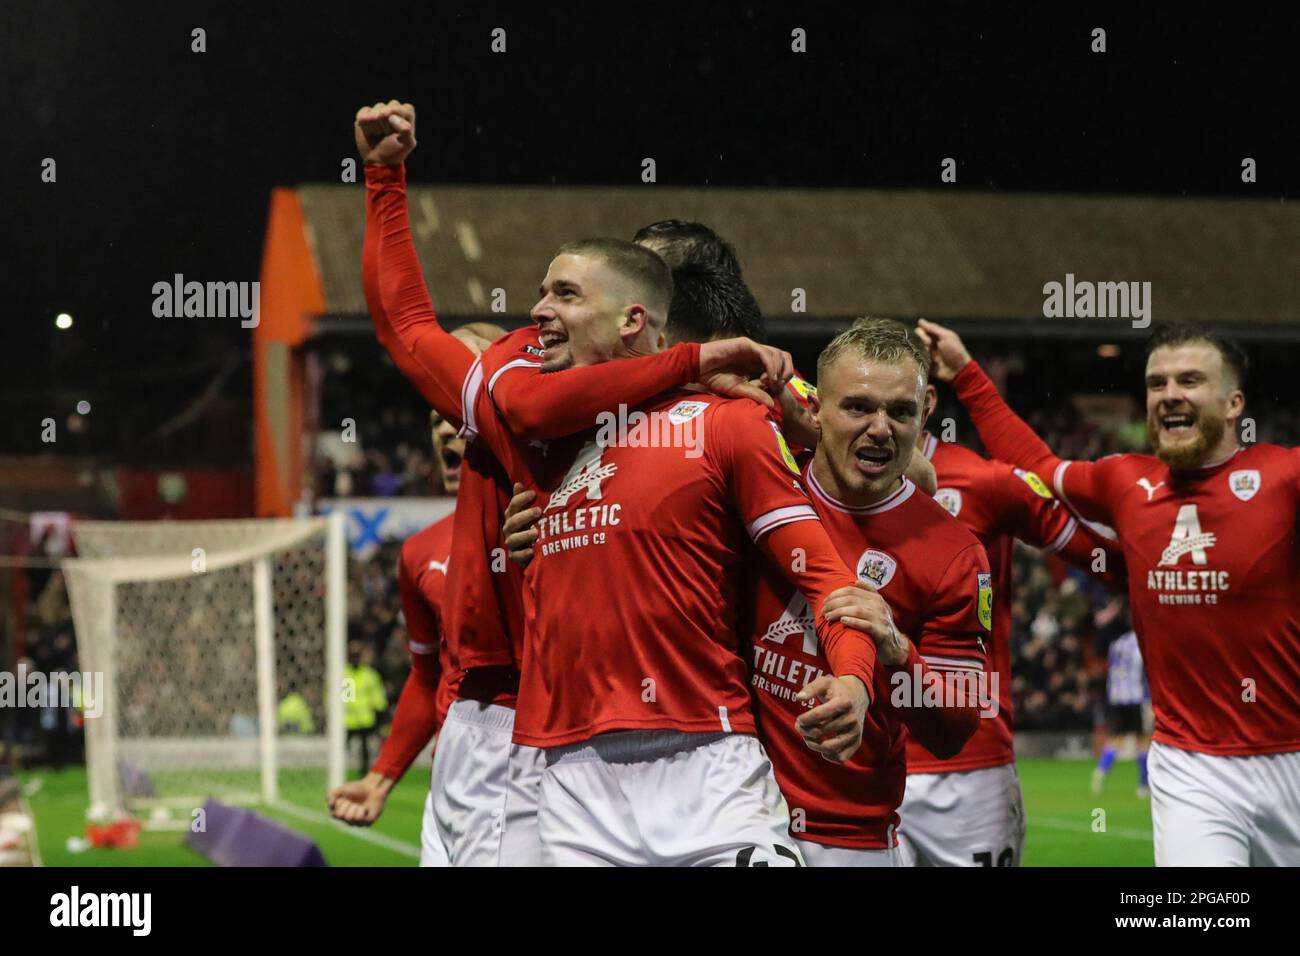 Max Watters #47 of Barnsley celebrates his goal to make it 3-2 during the Sky Bet League 1 match Barnsley vs Sheffield Wednesday at Oakwell, Barnsley, United Kingdom, 21st March 2023  (Photo by Alfie Cosgrove/News Images) Stock Photo